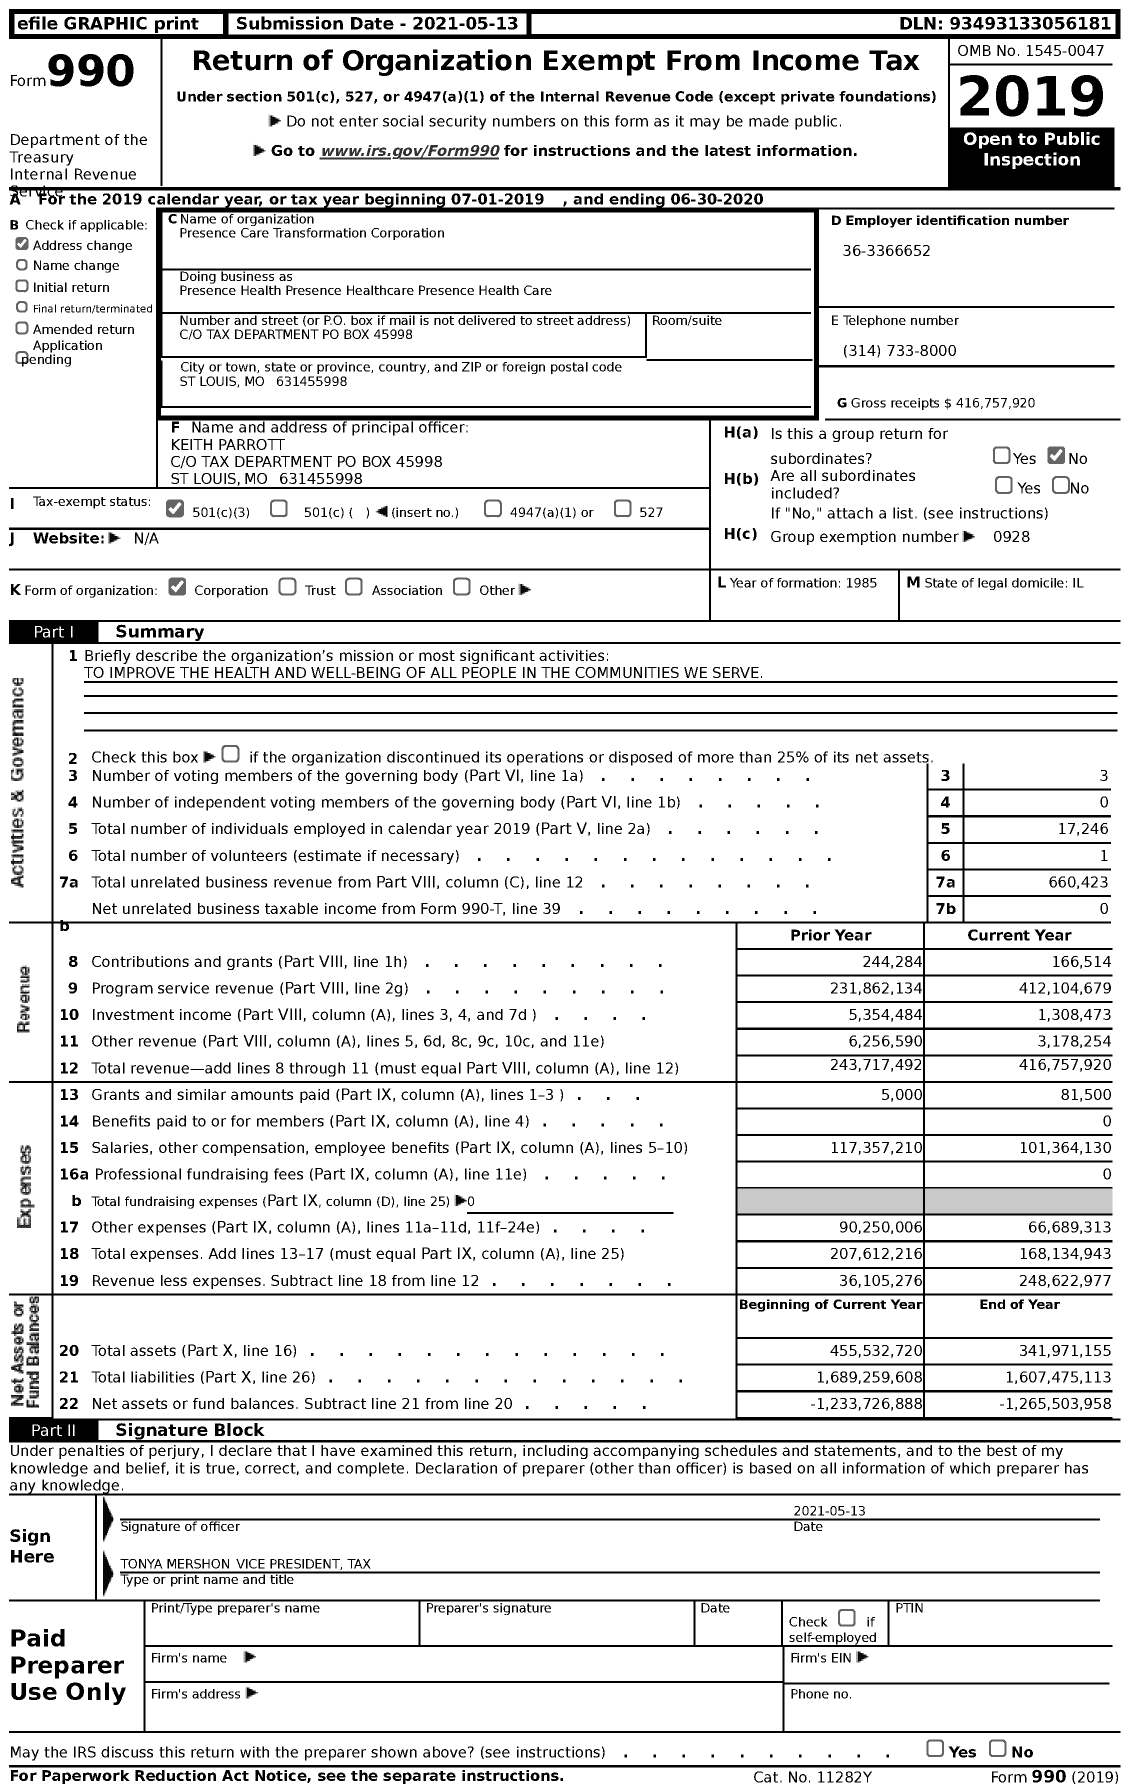 Image of first page of 2019 Form 990 for Presence Health Presence Healthcare Presence Health Care